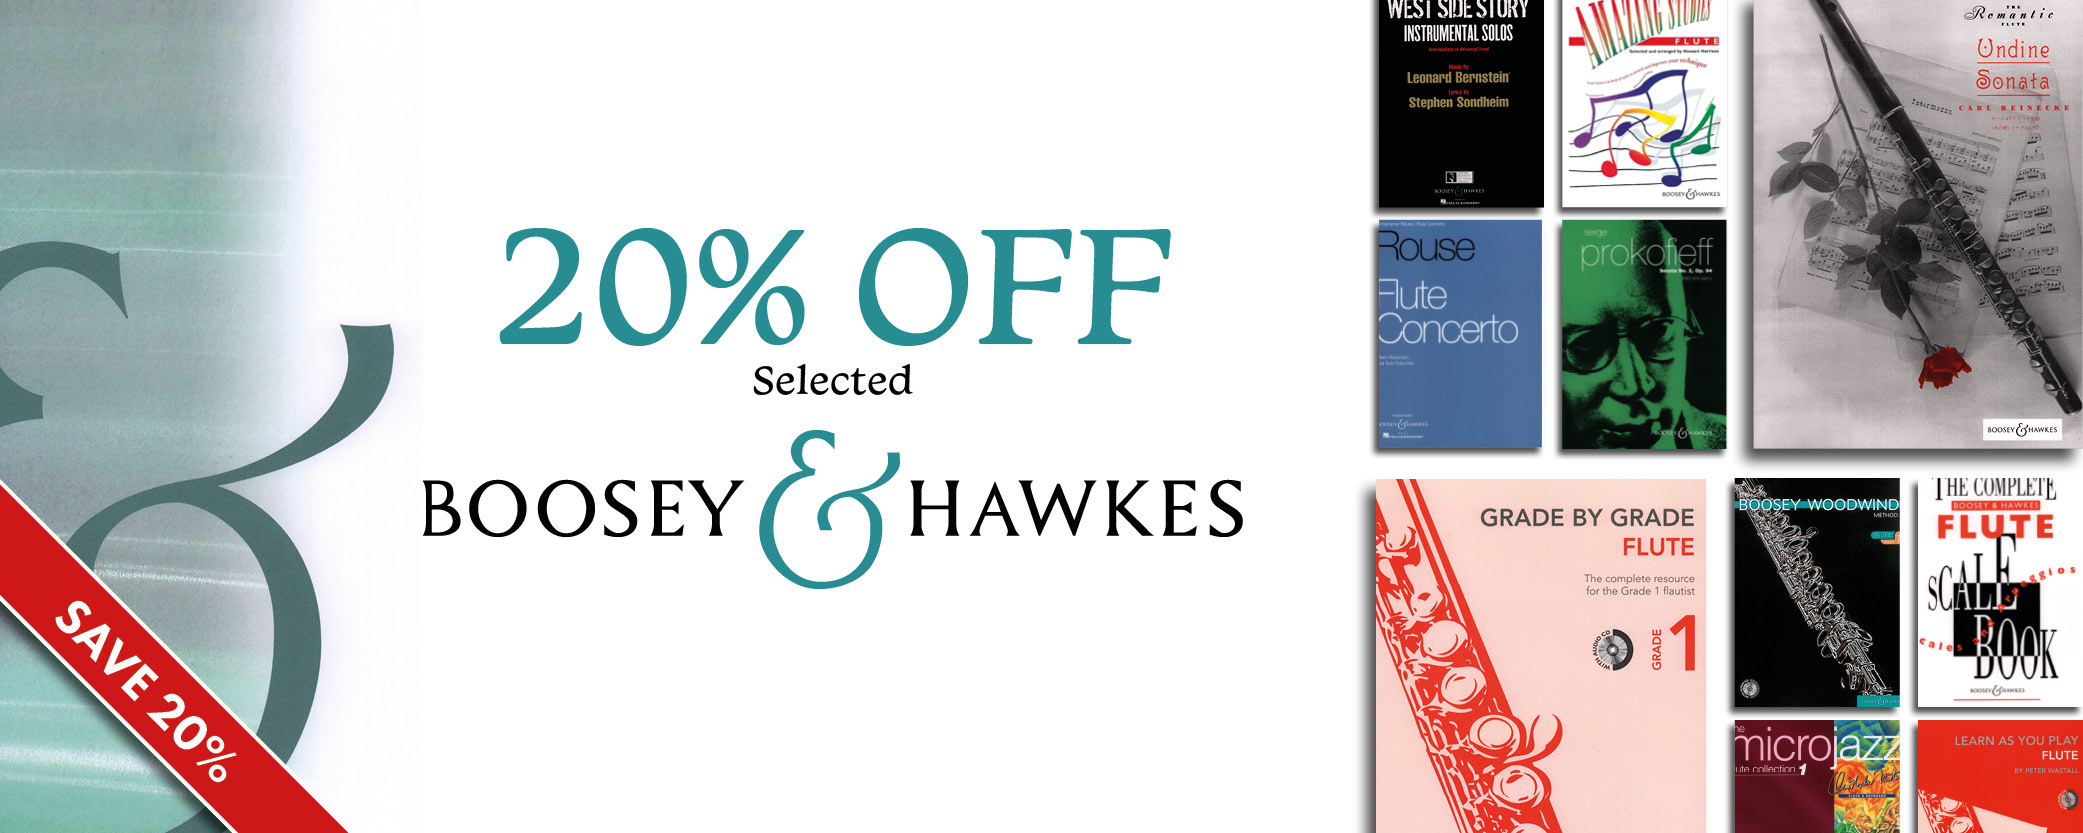 20% off Selected Boosey & Hawkes Music